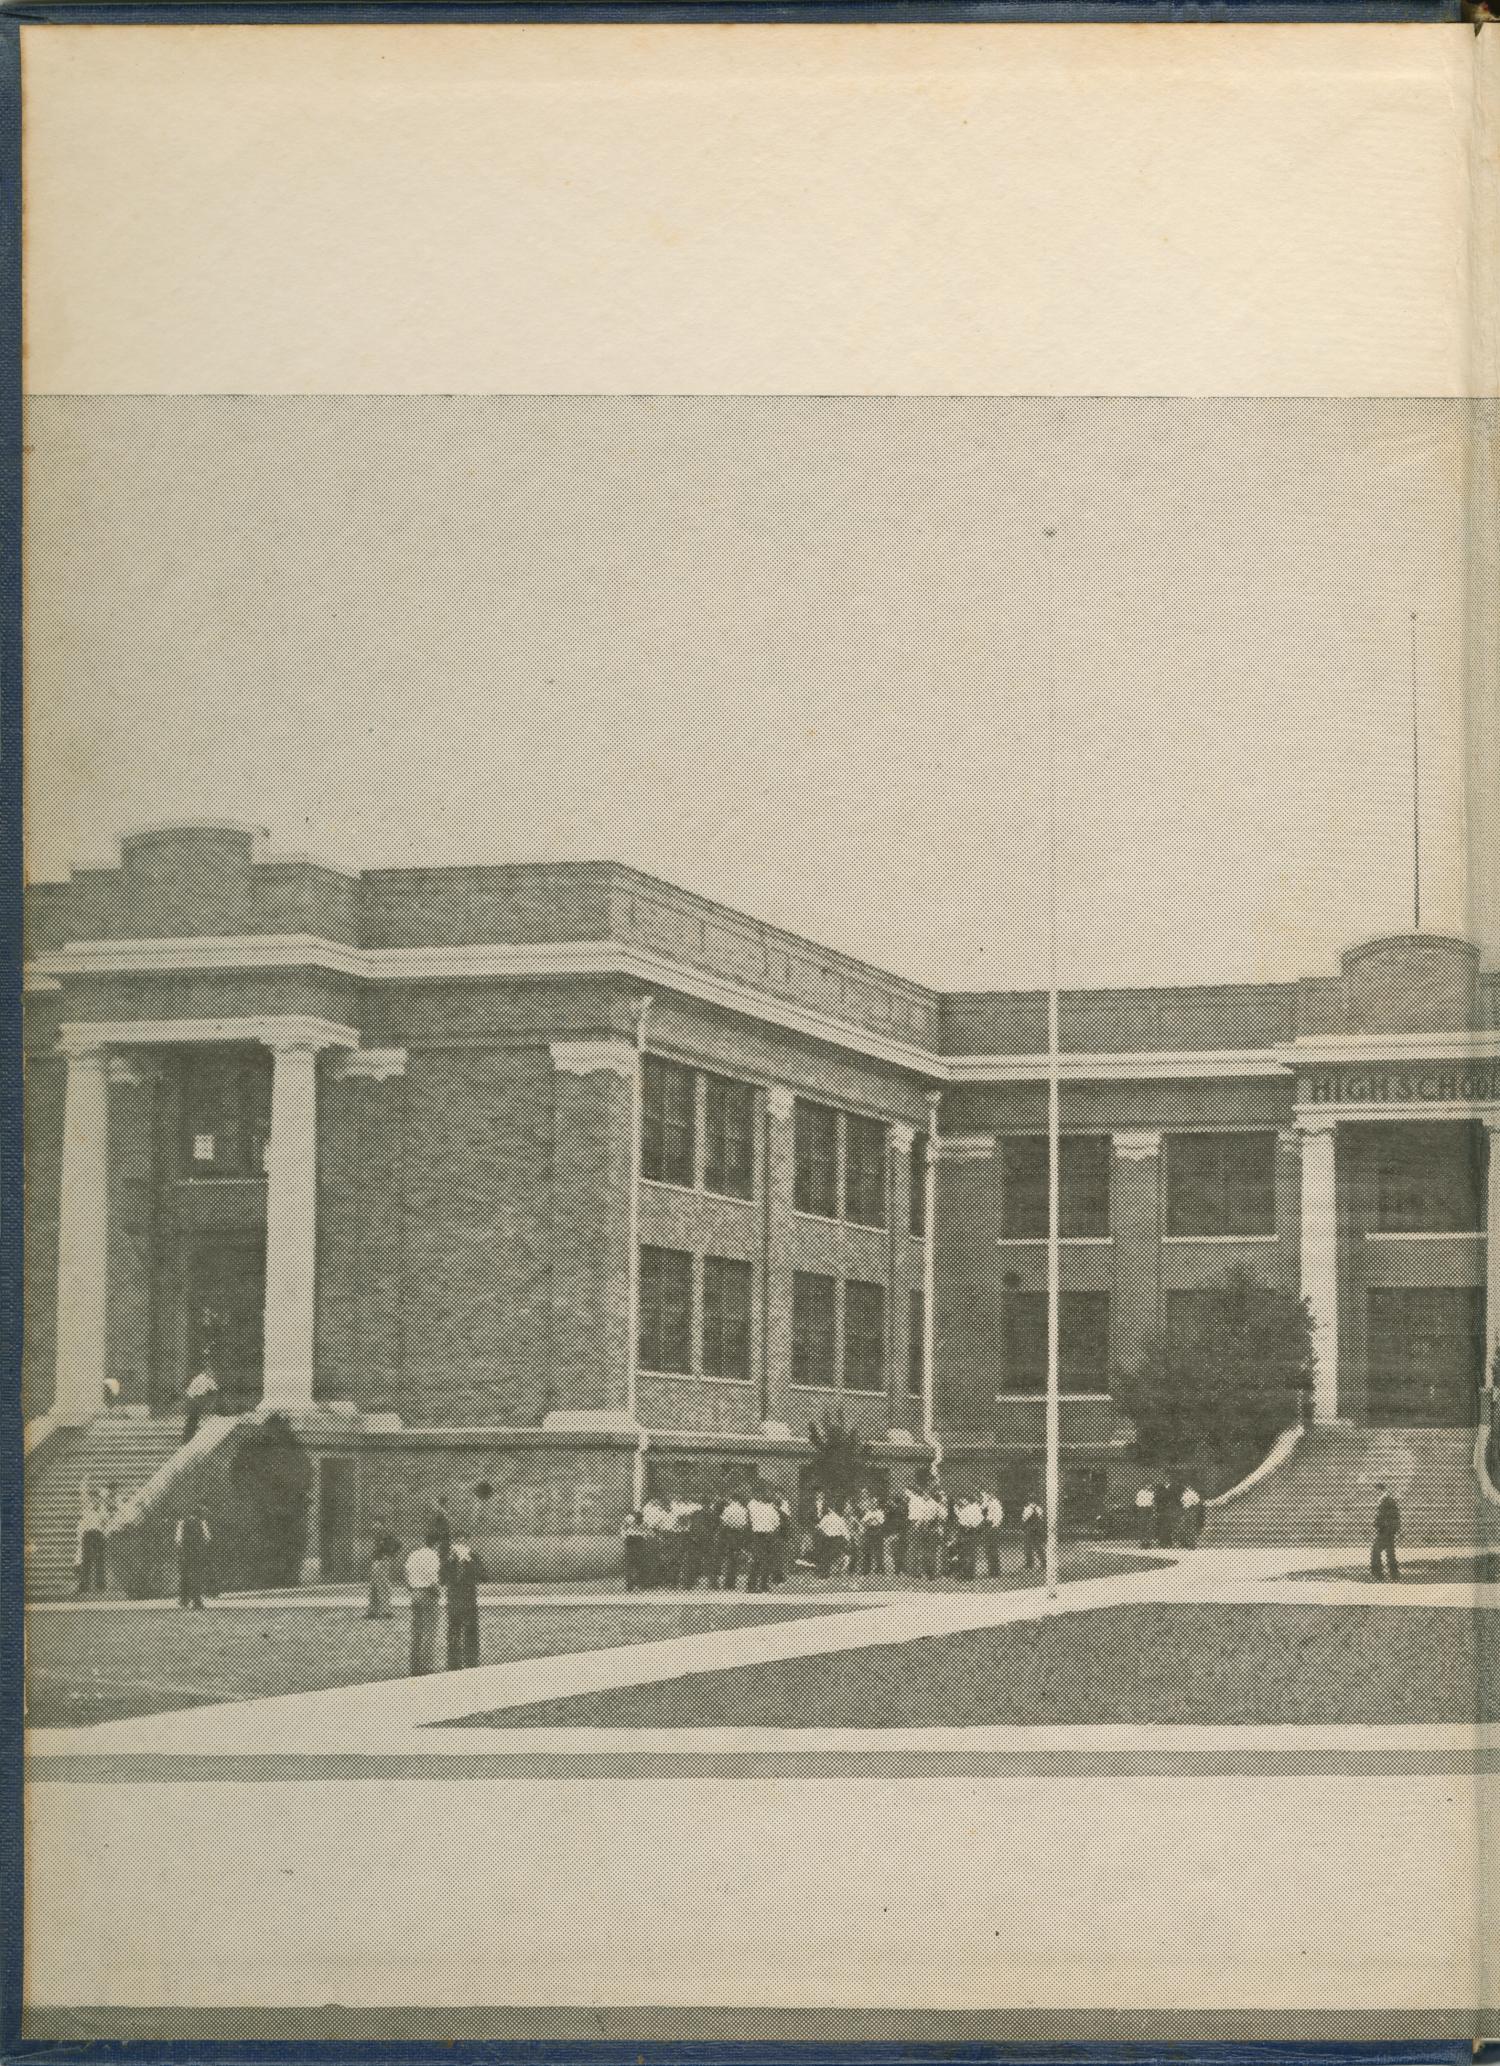 The Cotton Blossom, Yearbook of Temple High School, 1939
                                                
                                                    Front Inside
                                                